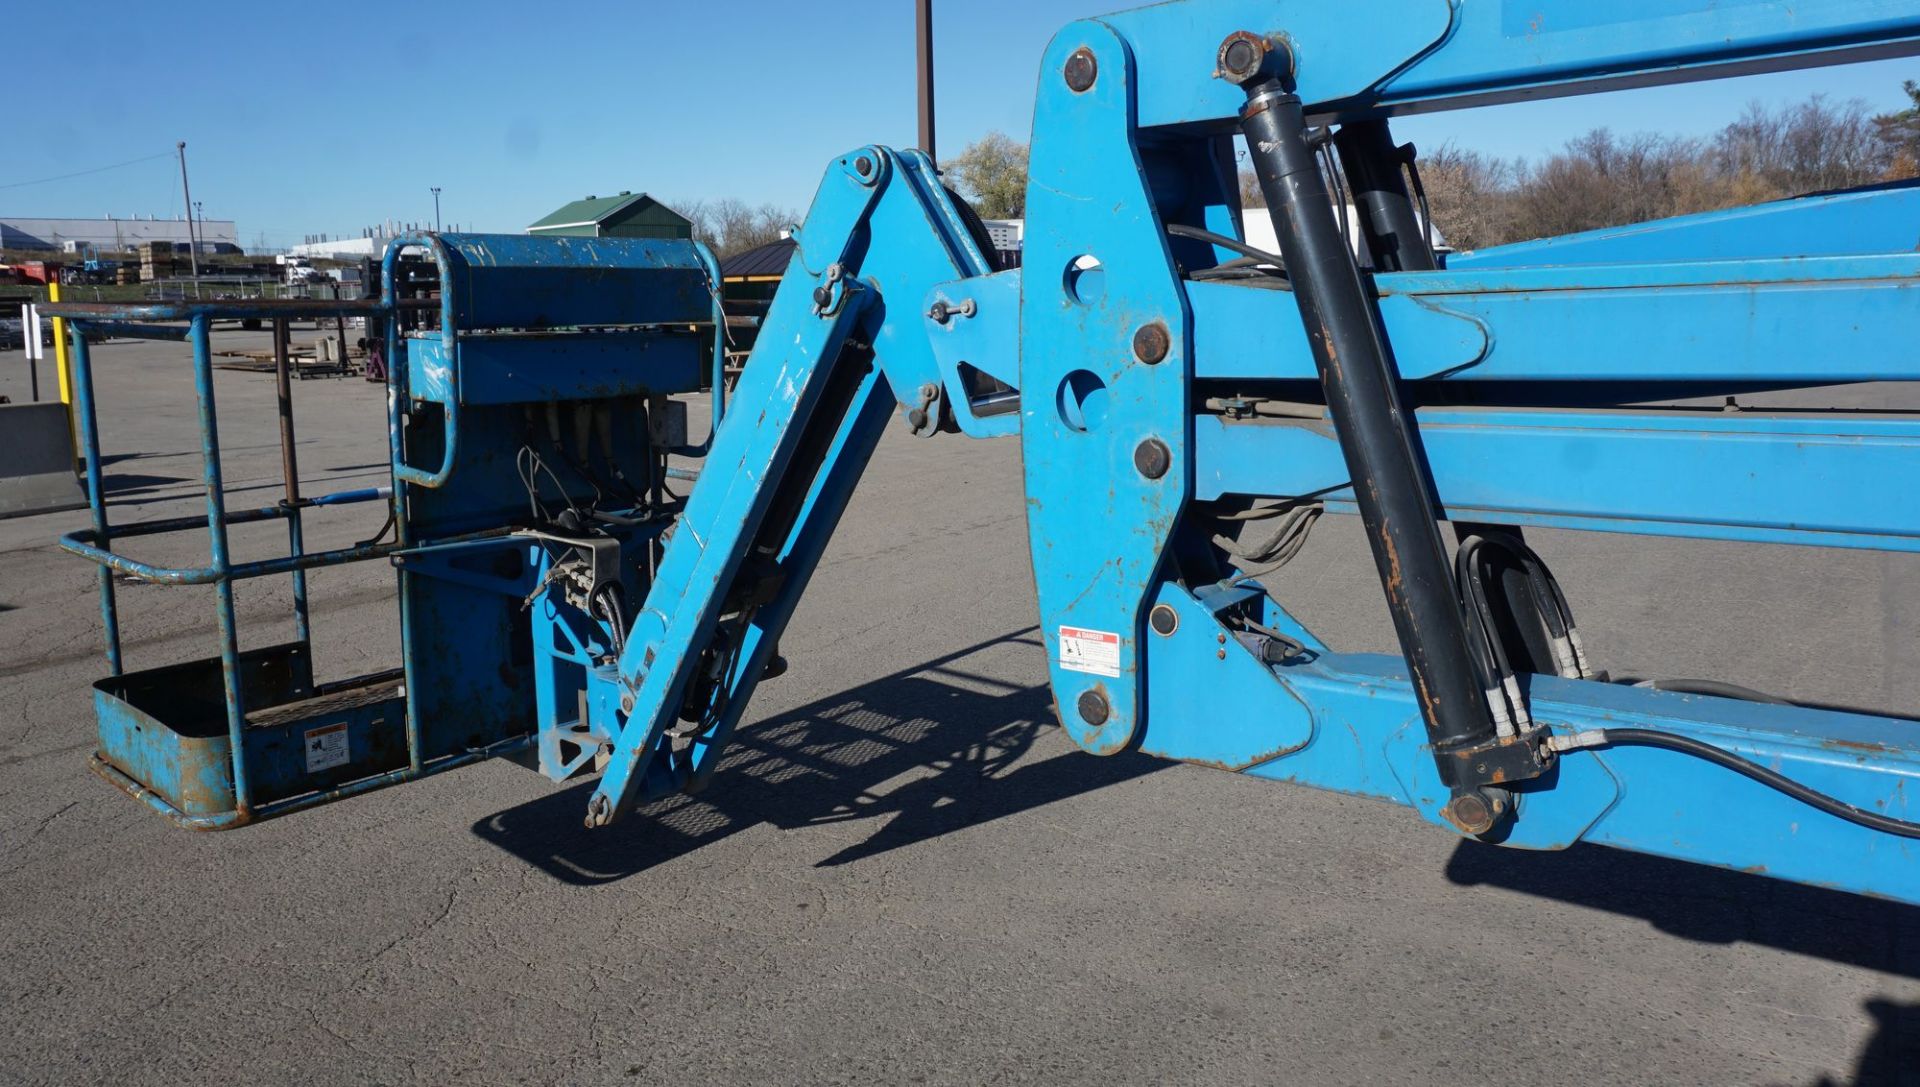 2008 GENIE MODEL Z45/25J BATTERY POWERED ARTICULATING BOOM LIFT, 45' MAX PLATFORM HEIGHT - 51' - Image 7 of 10